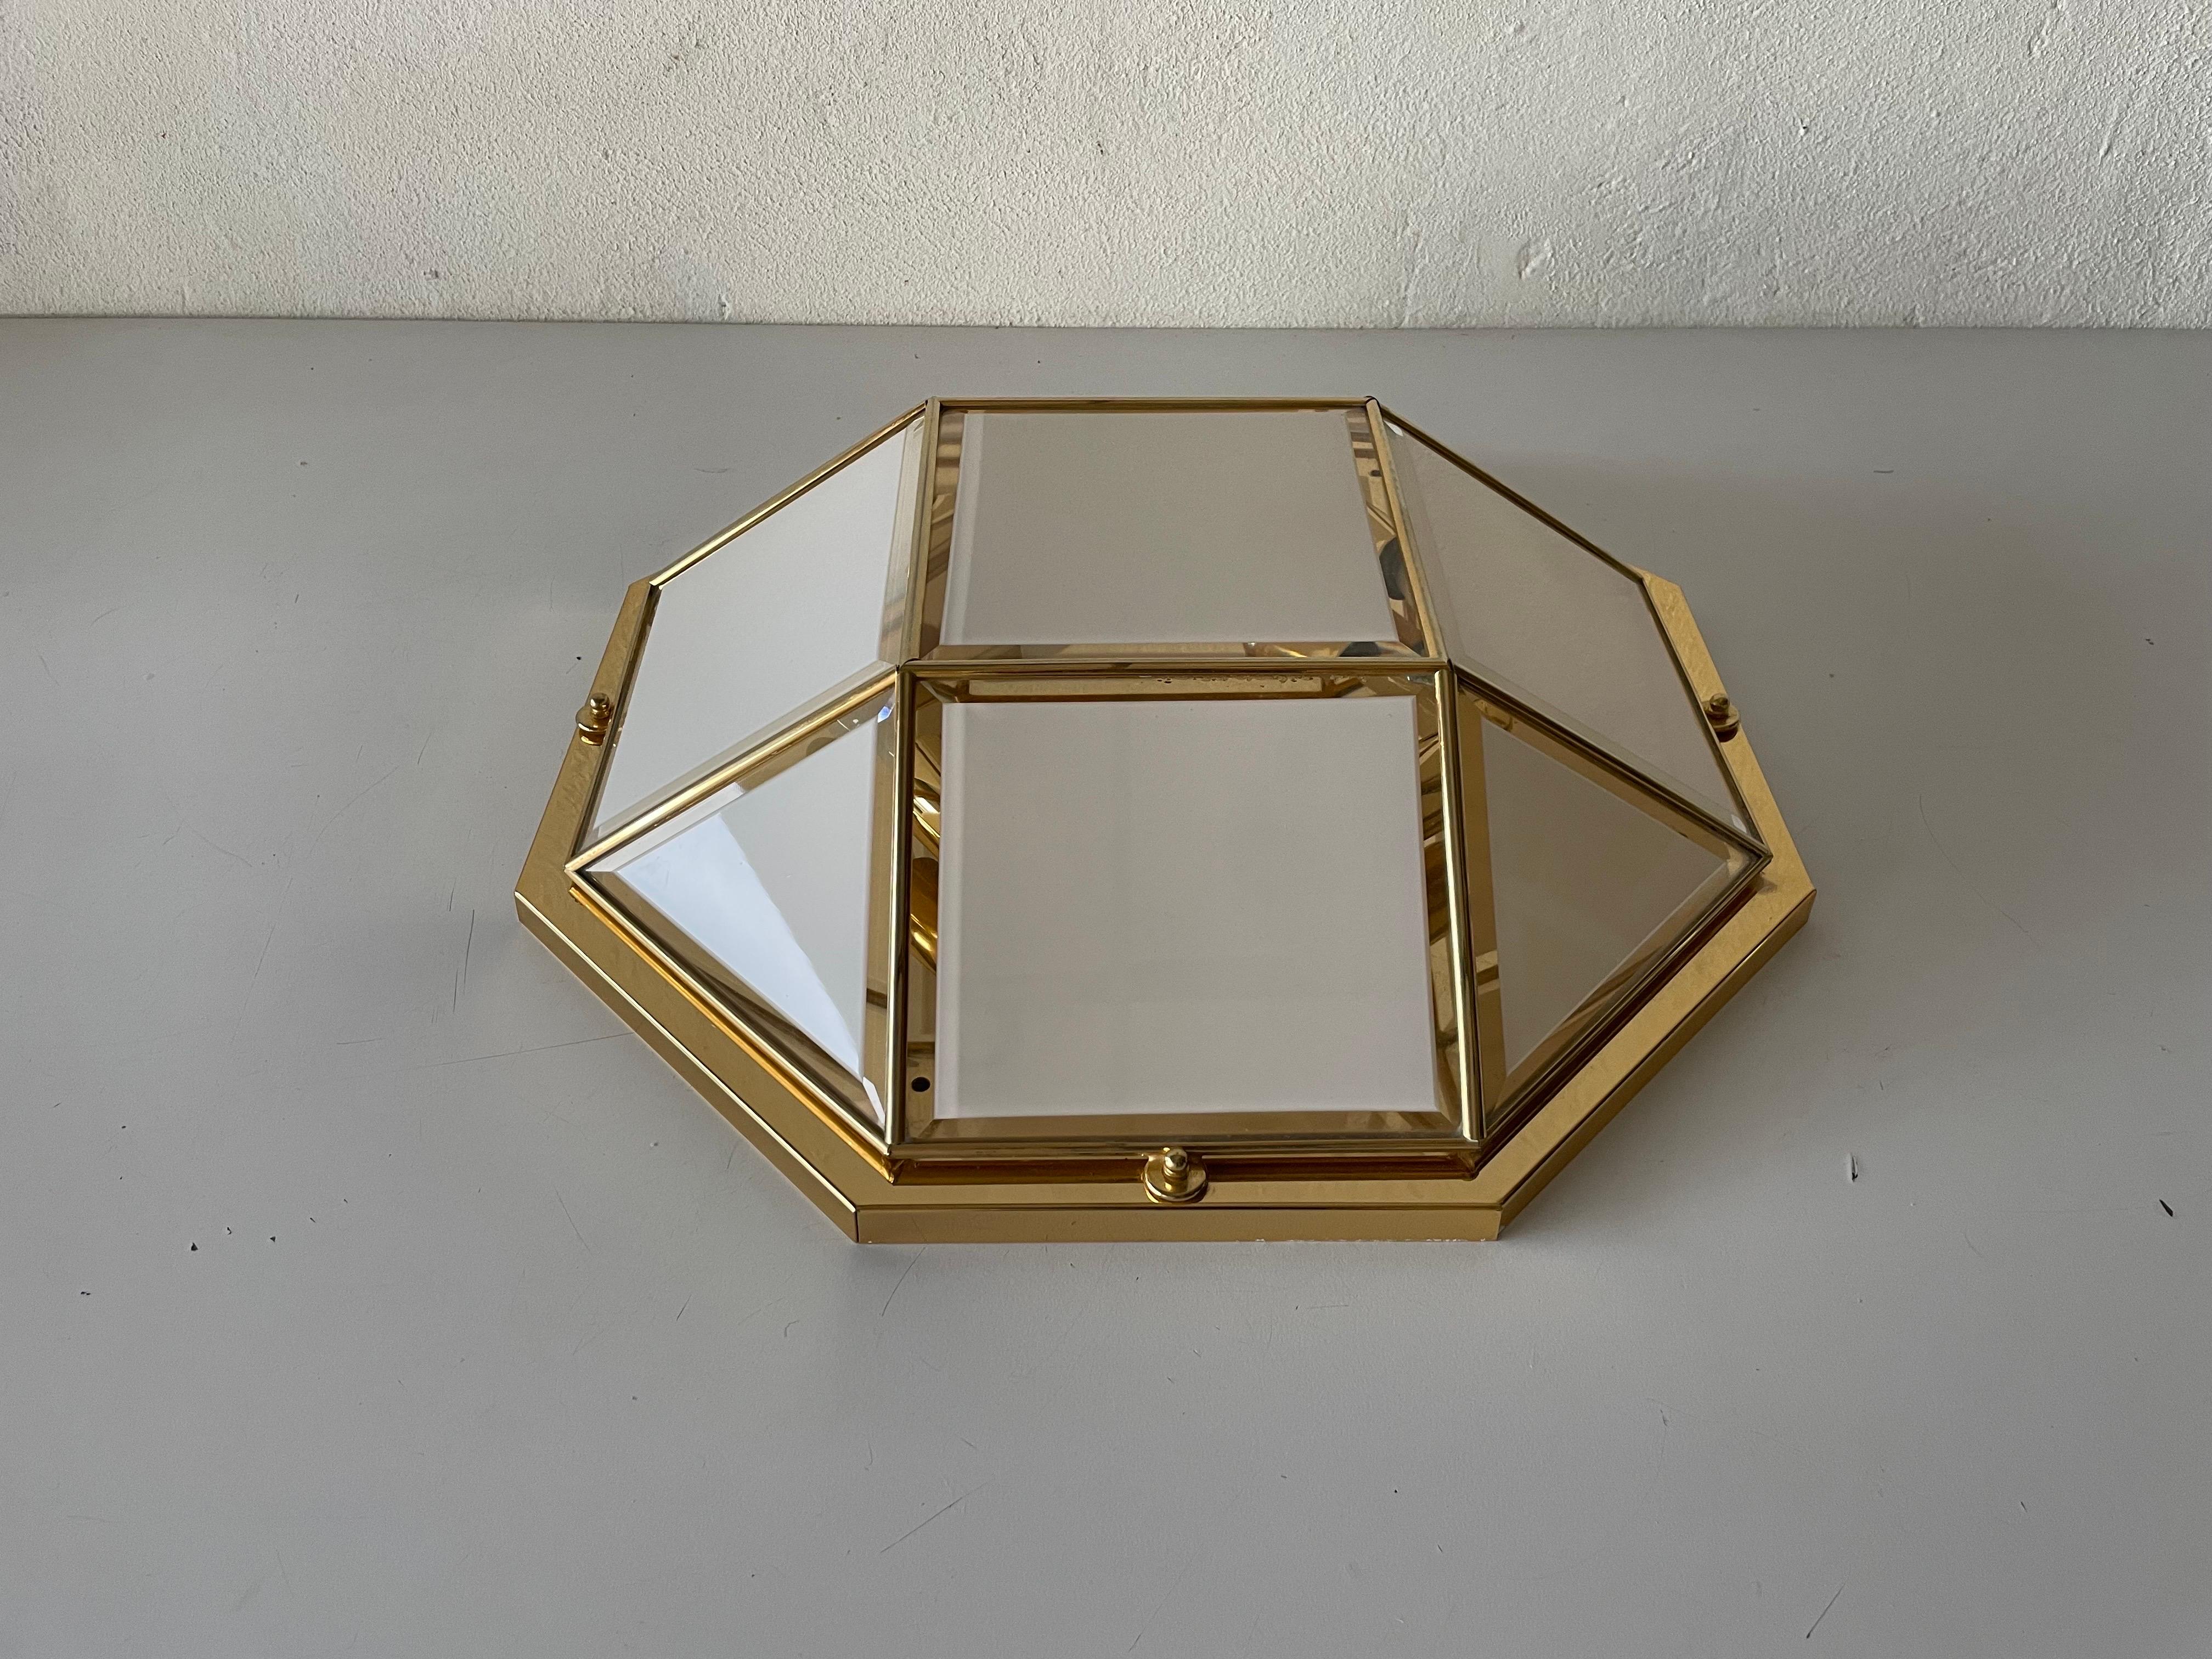 Octagonal white glass and gold metal ceiling lamp or Flush Mount by Star Leuchten, 1980s, Germany

Sculptural very elegant rare design flush mount. 

It is very ideal and suitable for all living areas.


Lamp is in good condition. No damage,